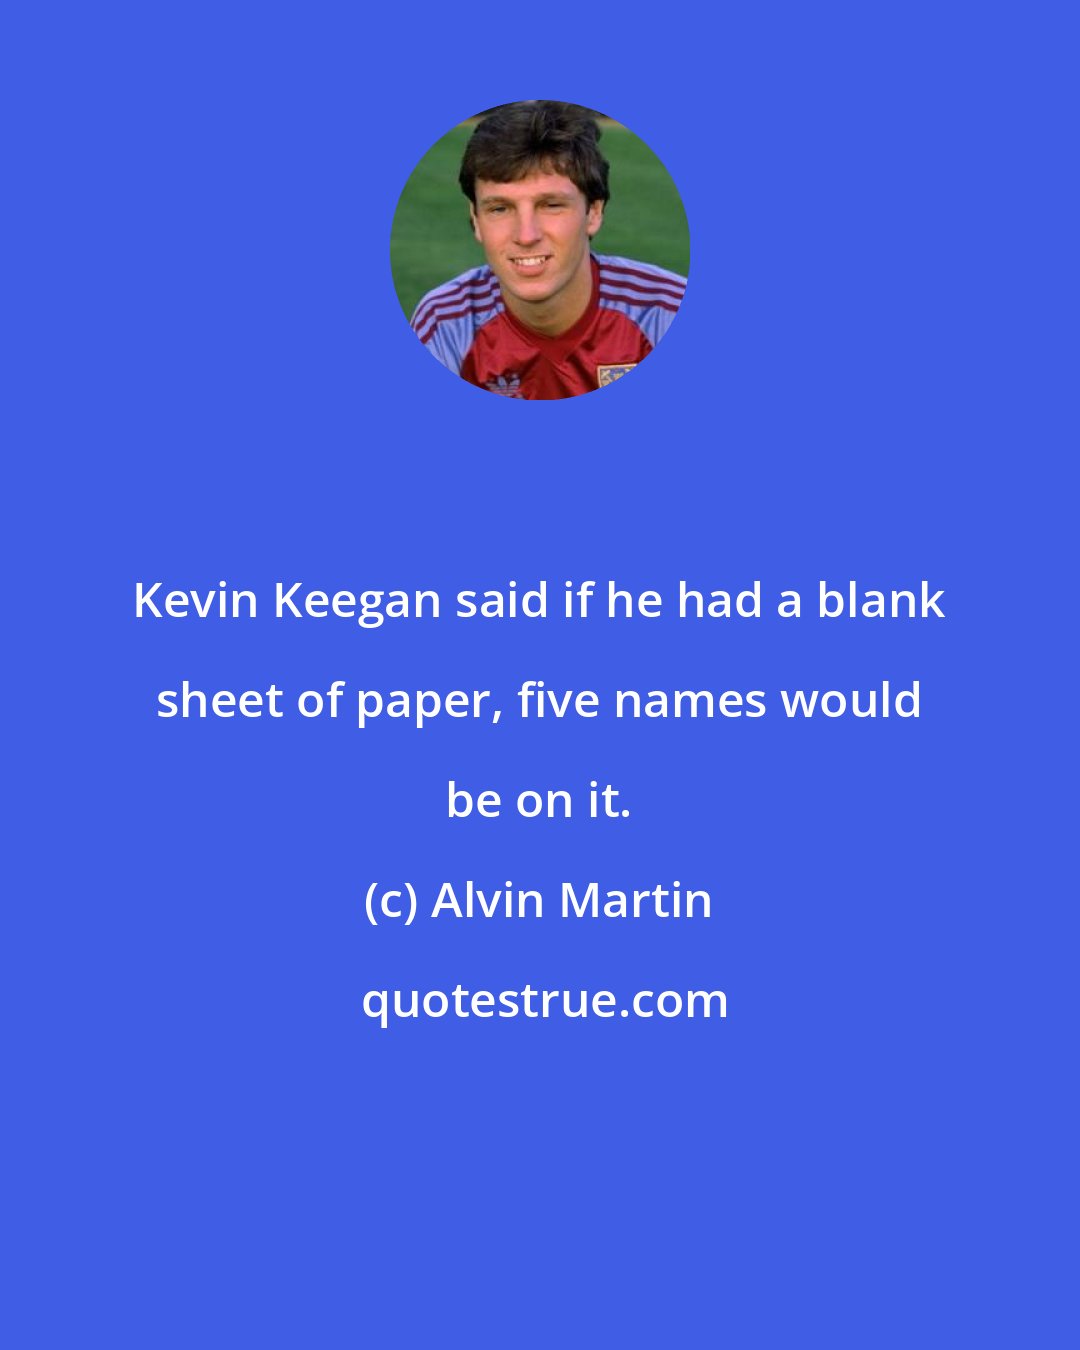 Alvin Martin: Kevin Keegan said if he had a blank sheet of paper, five names would be on it.